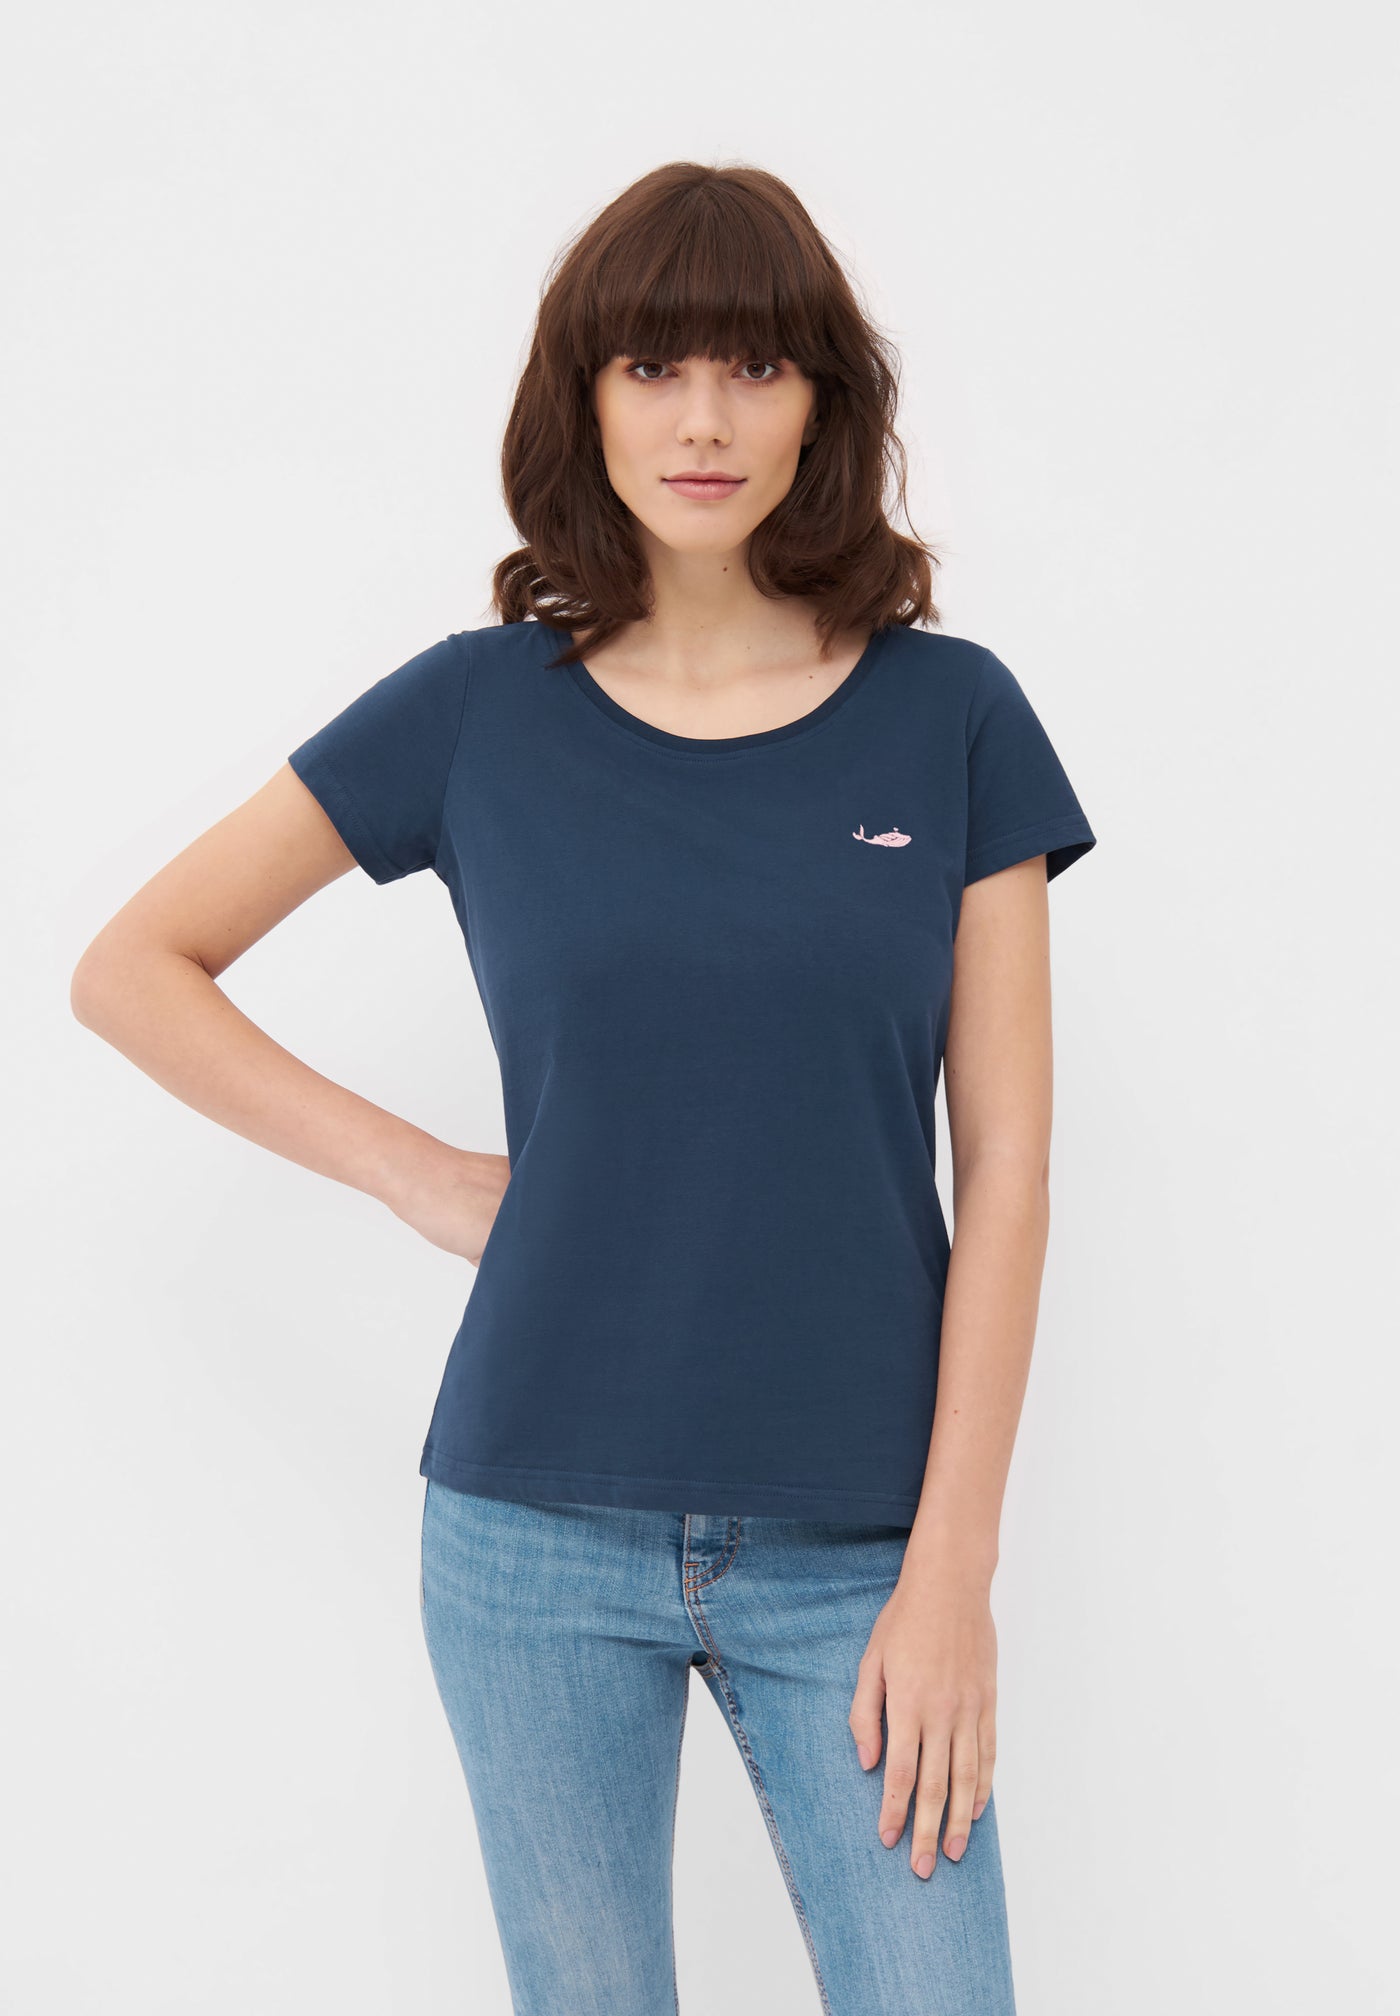 MBRC WOMEN SUSTAINABLE BLUE ROUND NECK T-SHIRT "PINK LOGO" - FRONTAL VIEW